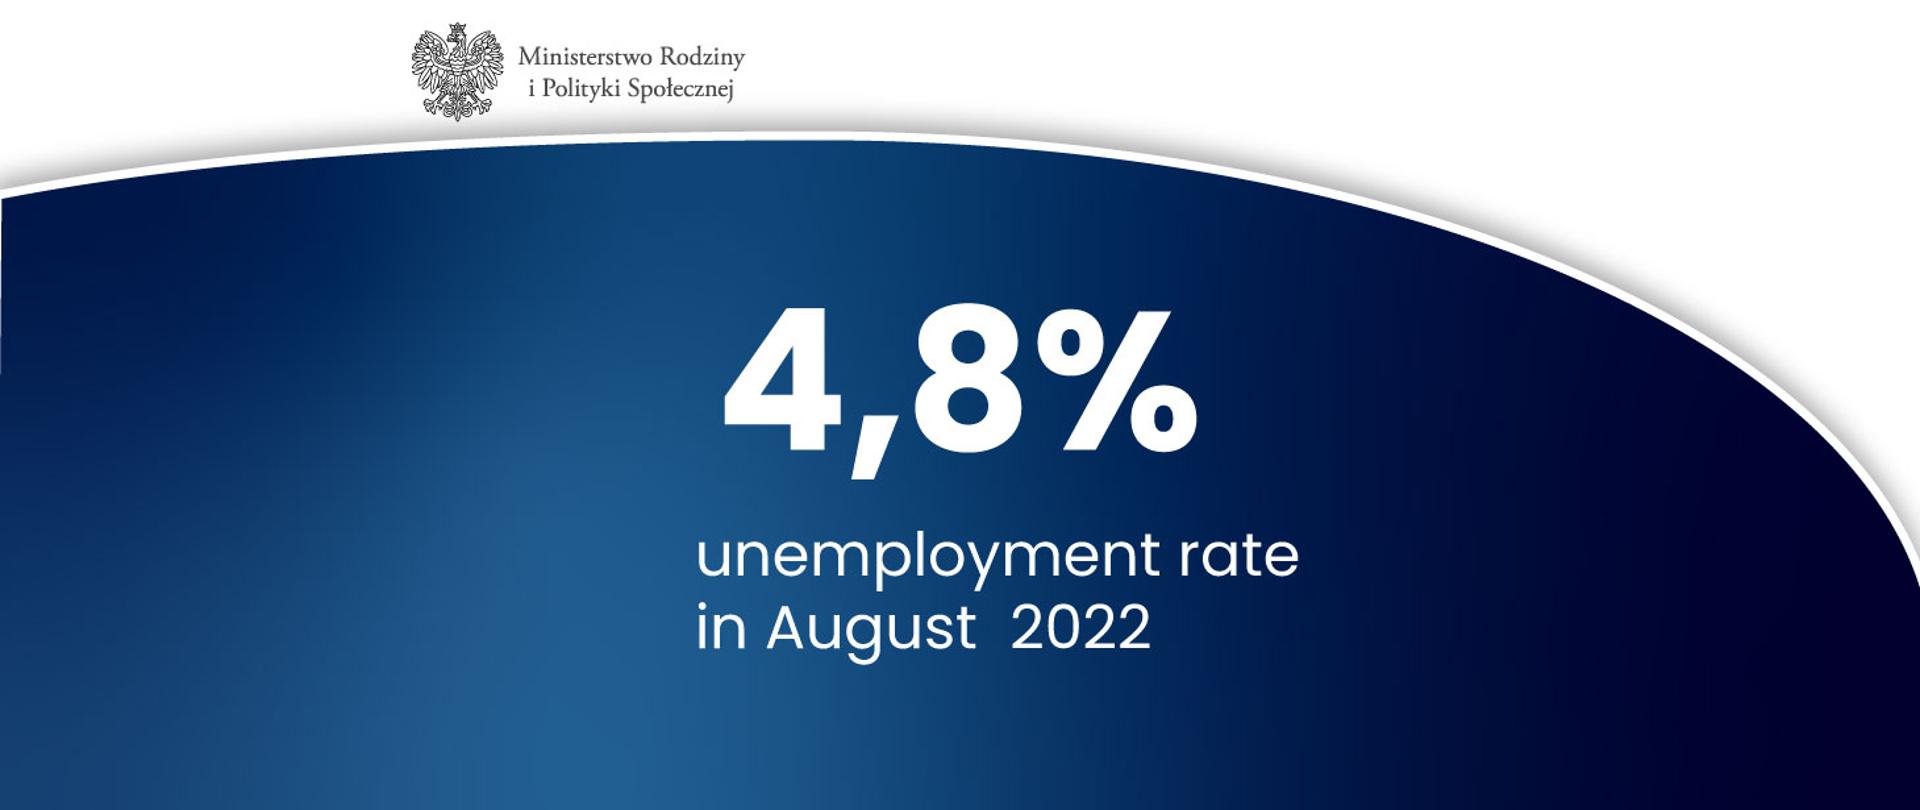 Unemployment in August decreased to 4.8% – this is even a better result than indicated by the estimates!